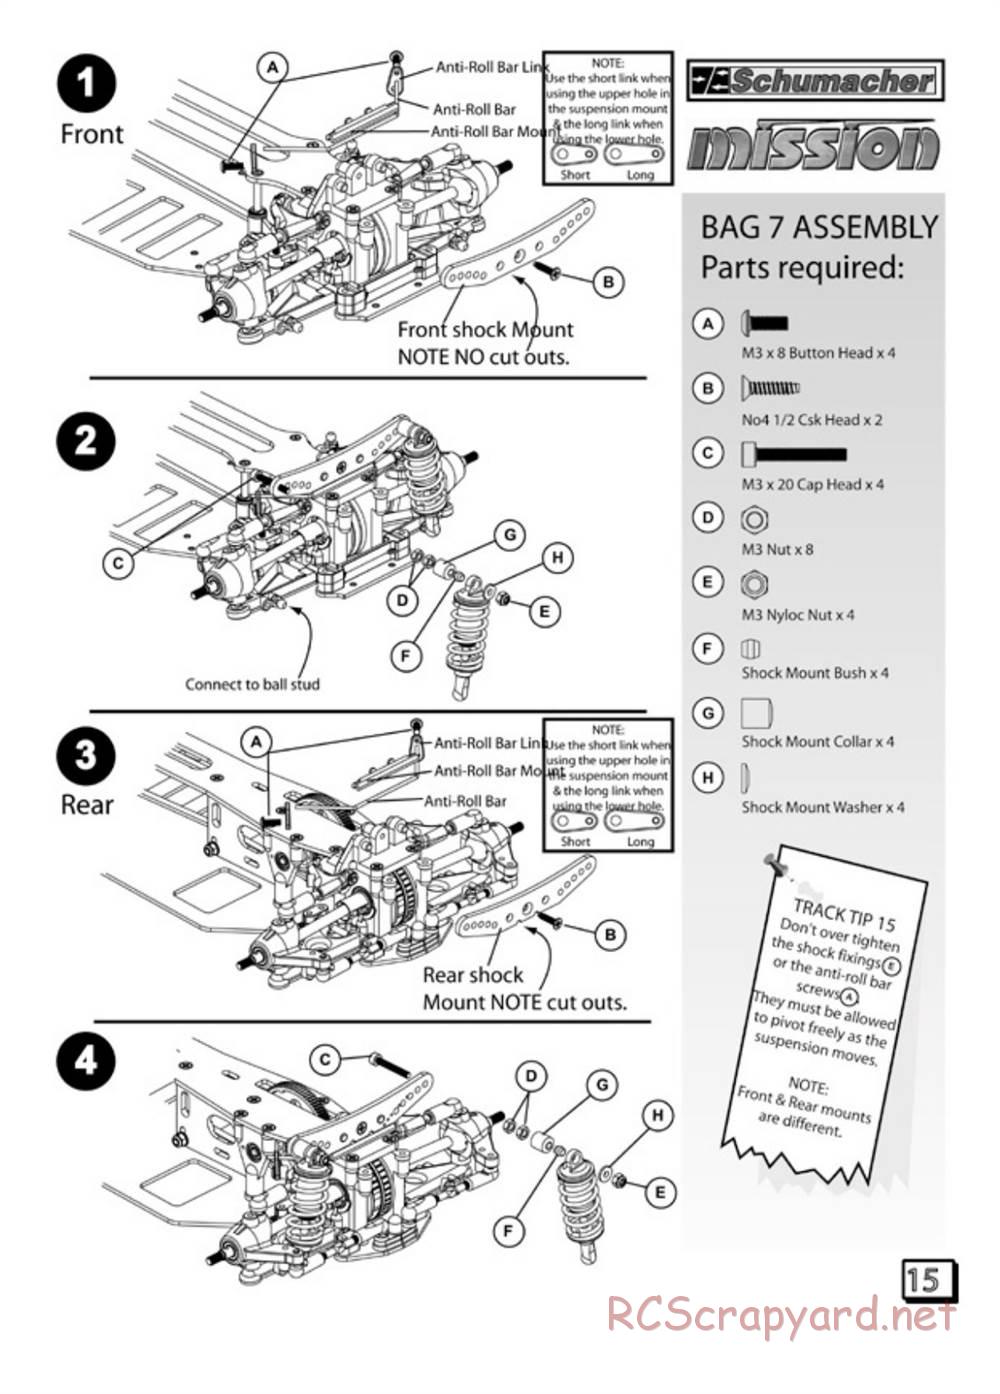 Schumacher - Mission - Manual - Page 16